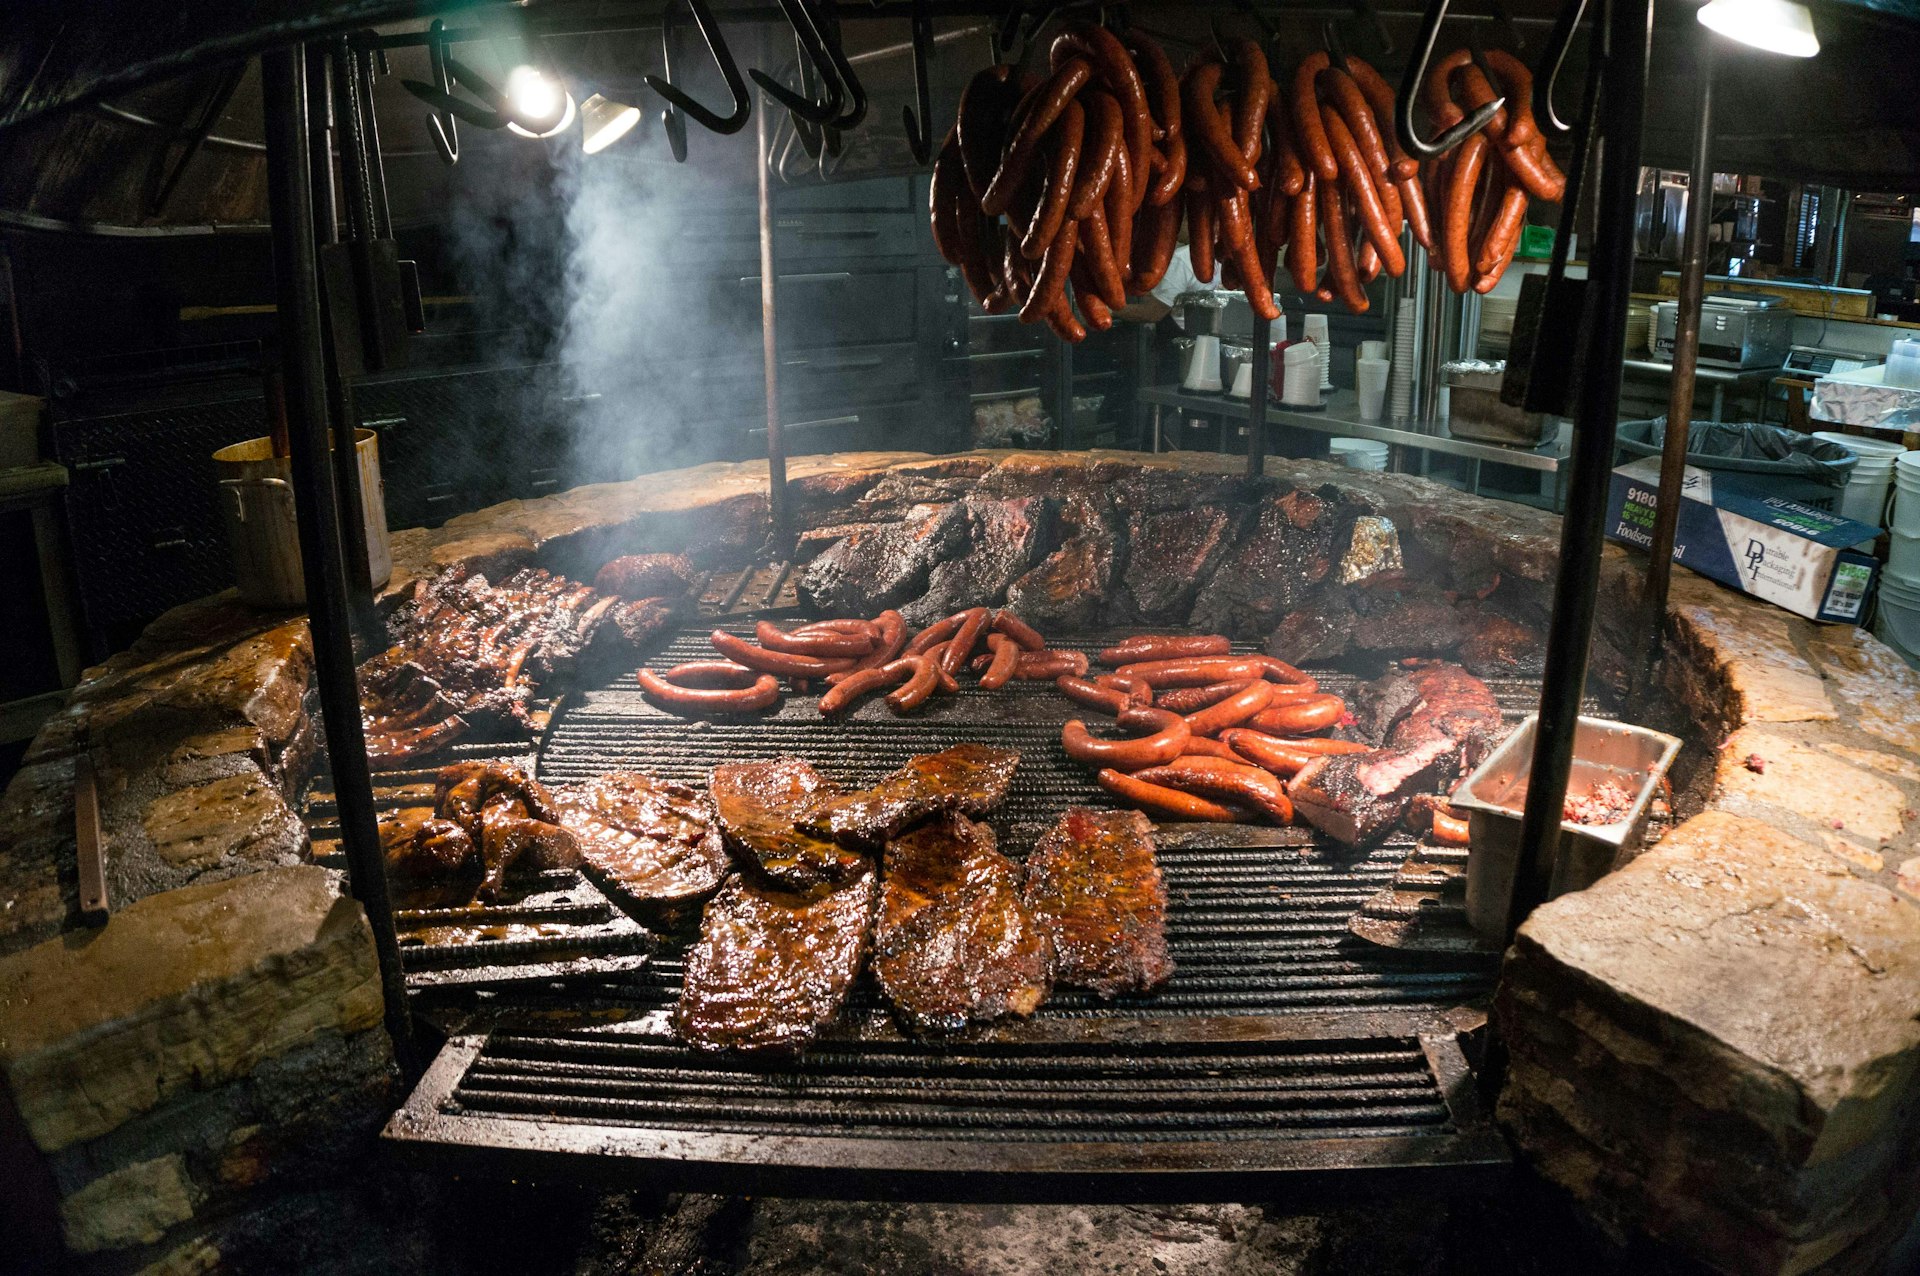 A variety of meats being prepared on The Salt Lick’s barbecue. Image by Anthony Quintano / CC BY 2.0